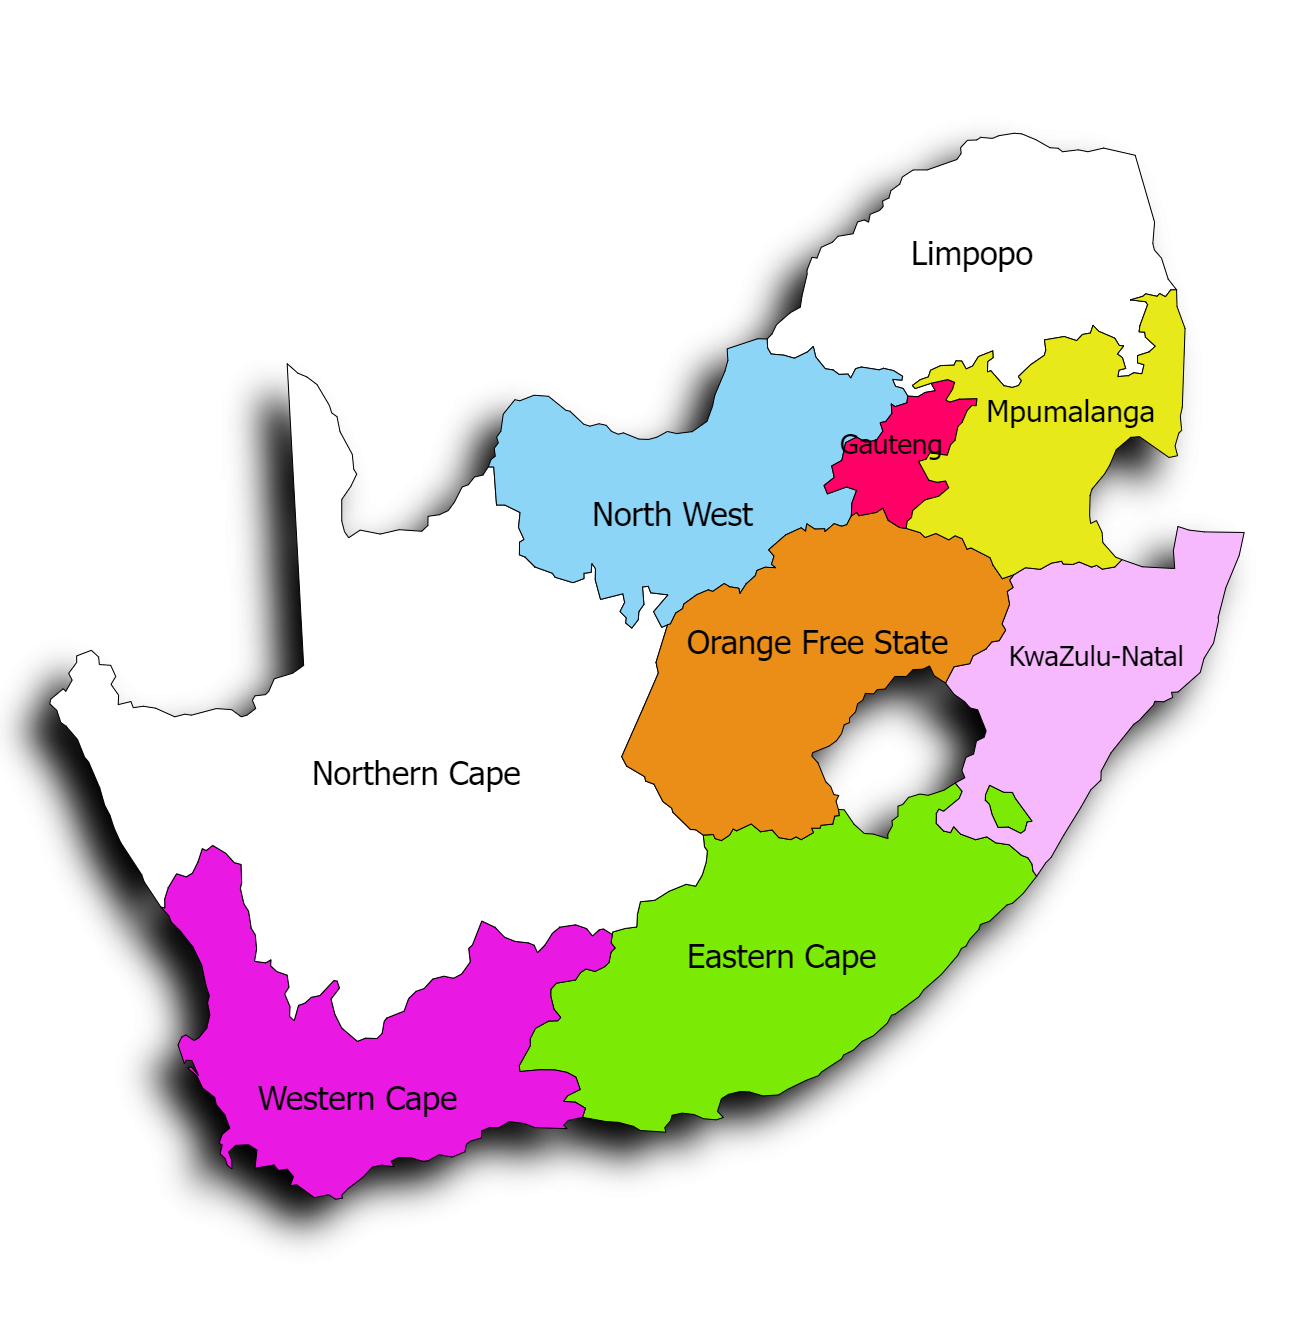 3530129013321040-south-africa-map-chart-3-16570212592932.png